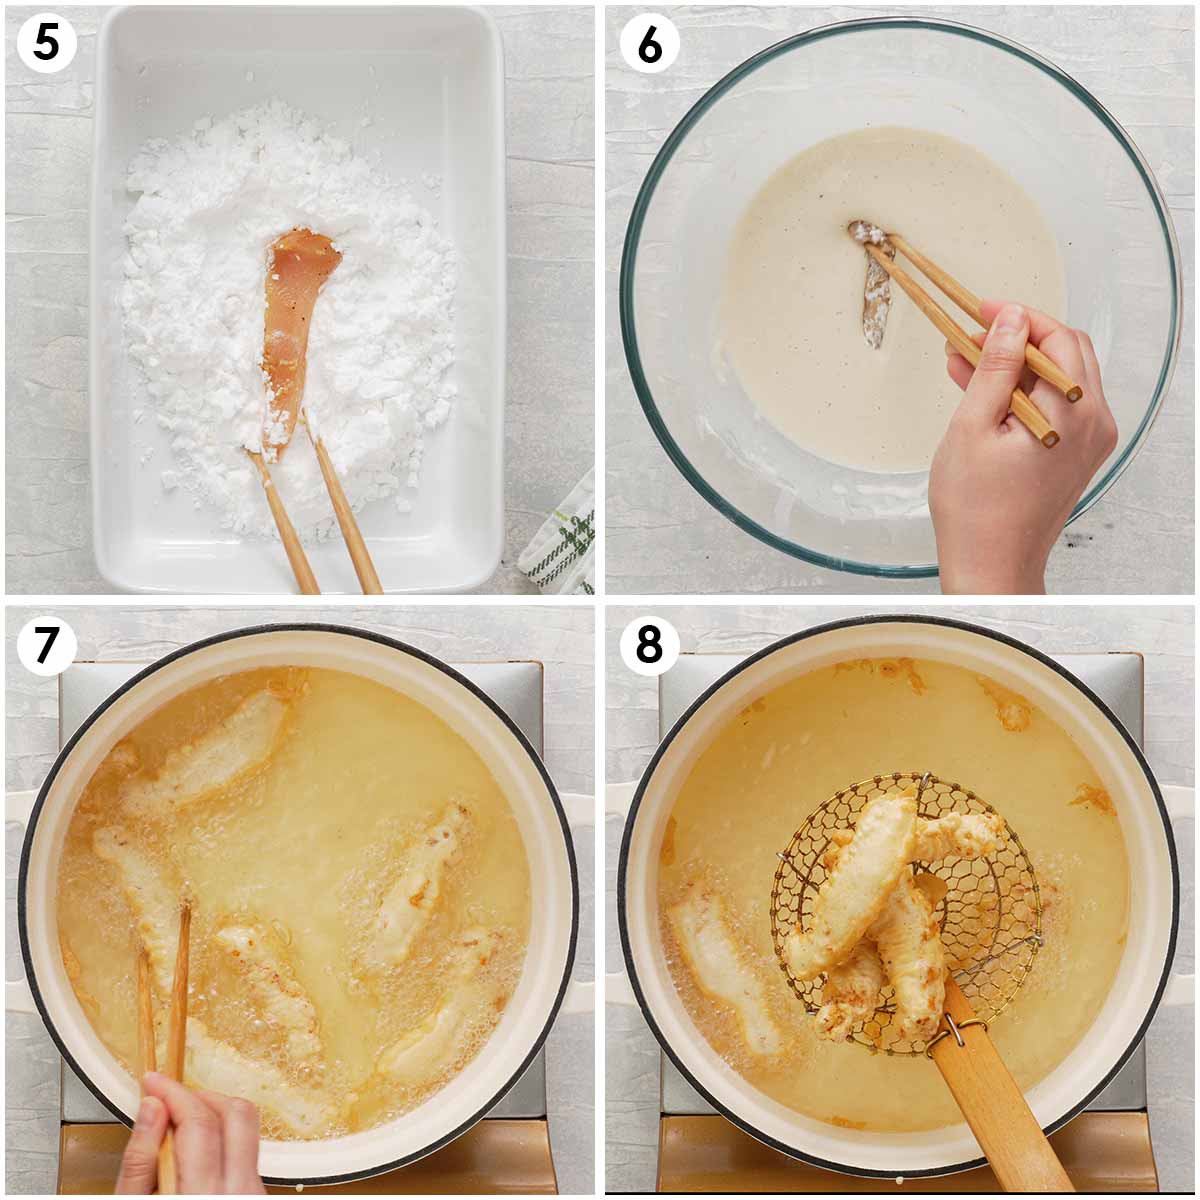 Four image collage showing how to make batter and fry the chicken.